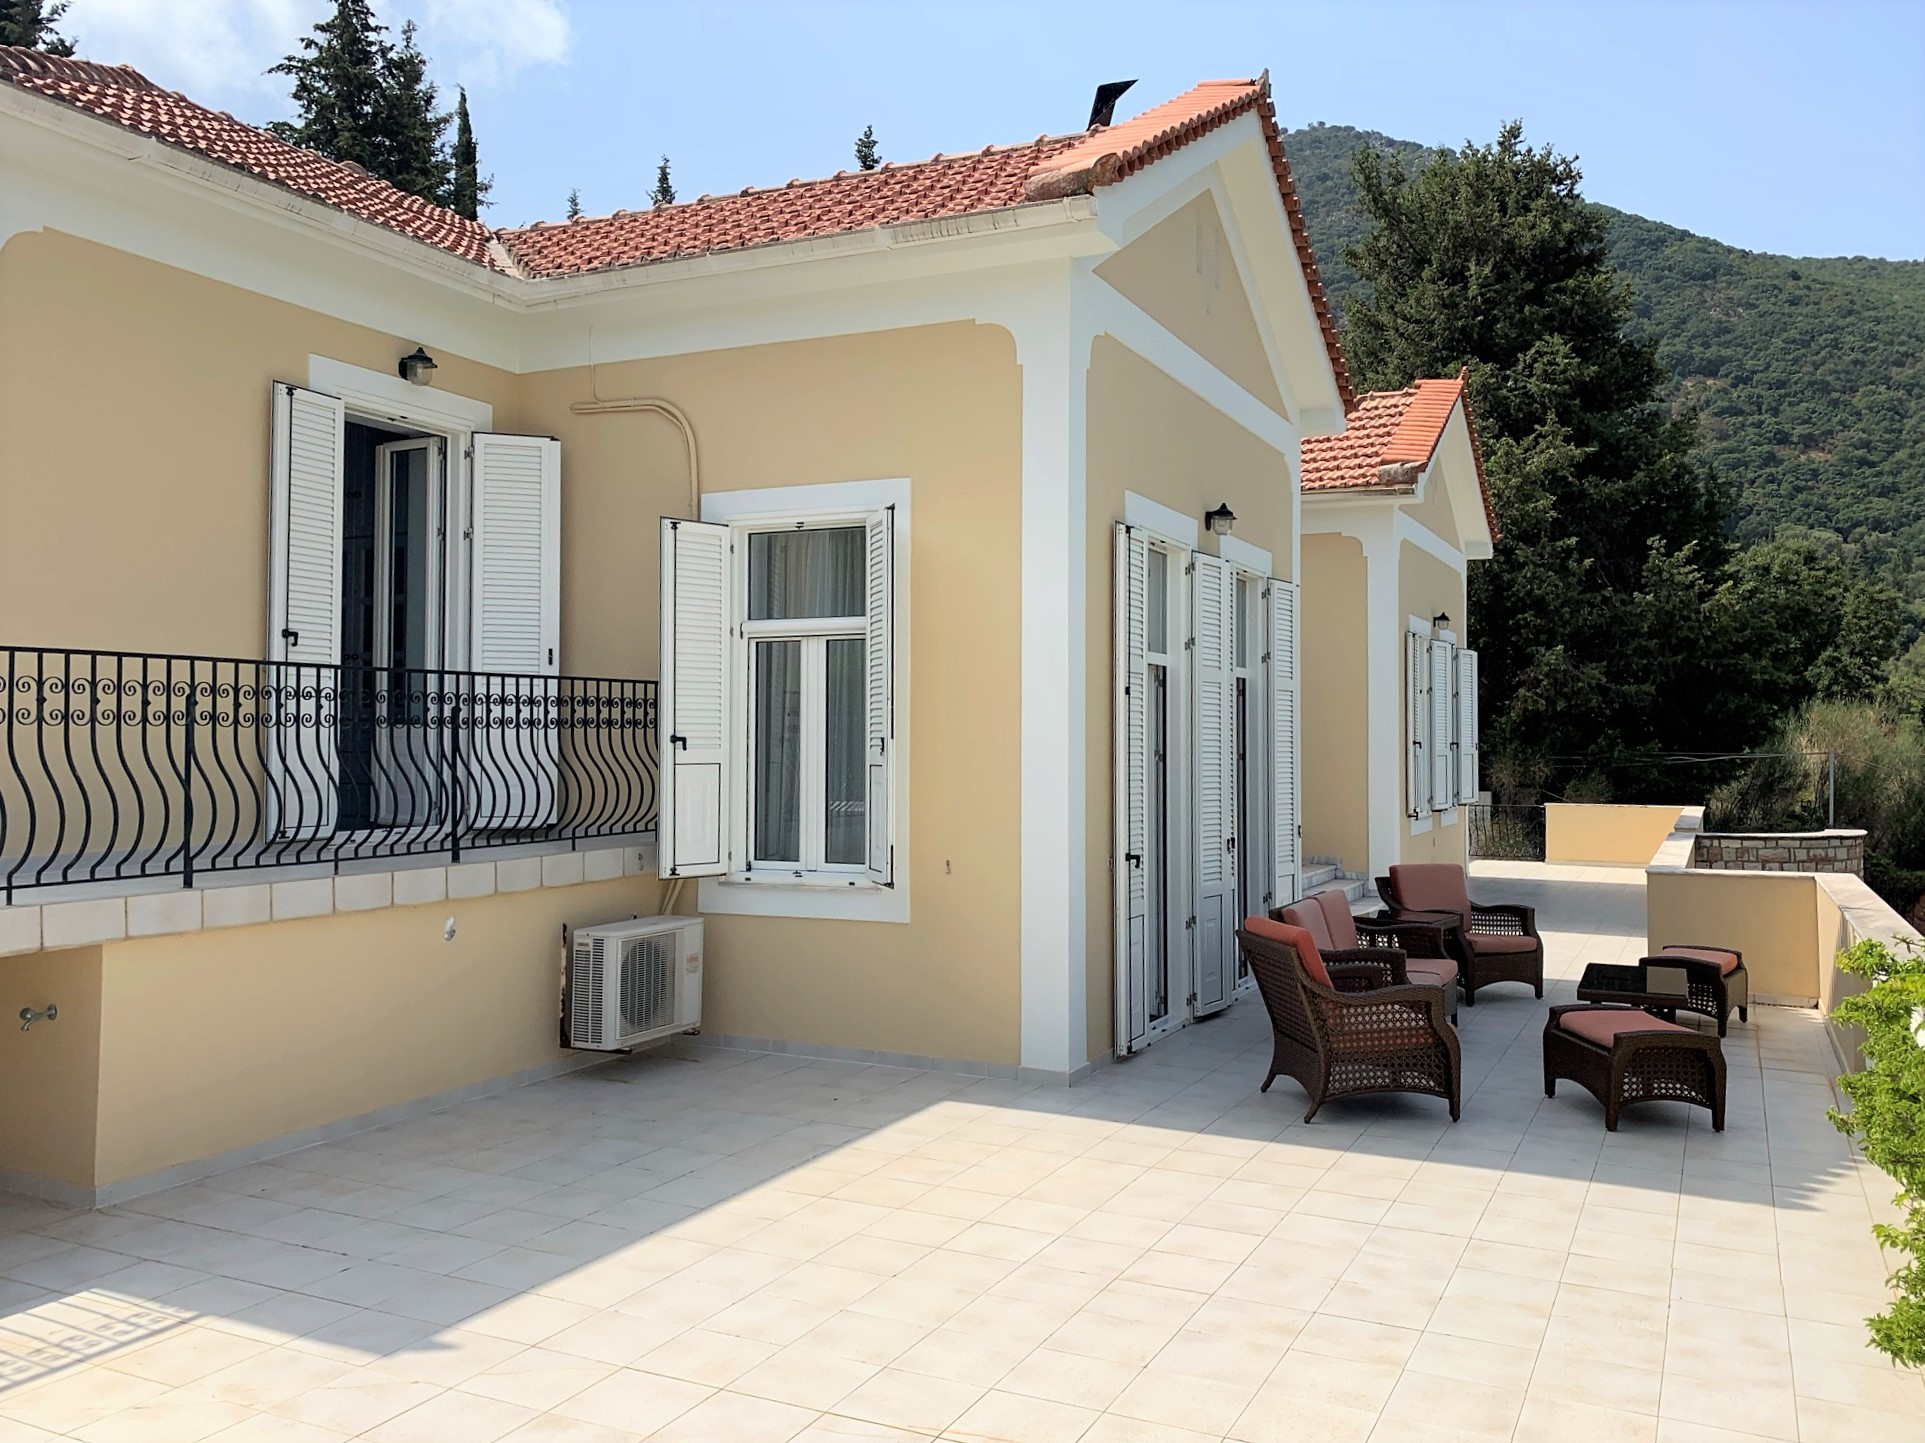 Balconies and sitting area of house for rent on Ithaca Greece, Brosta Aetos